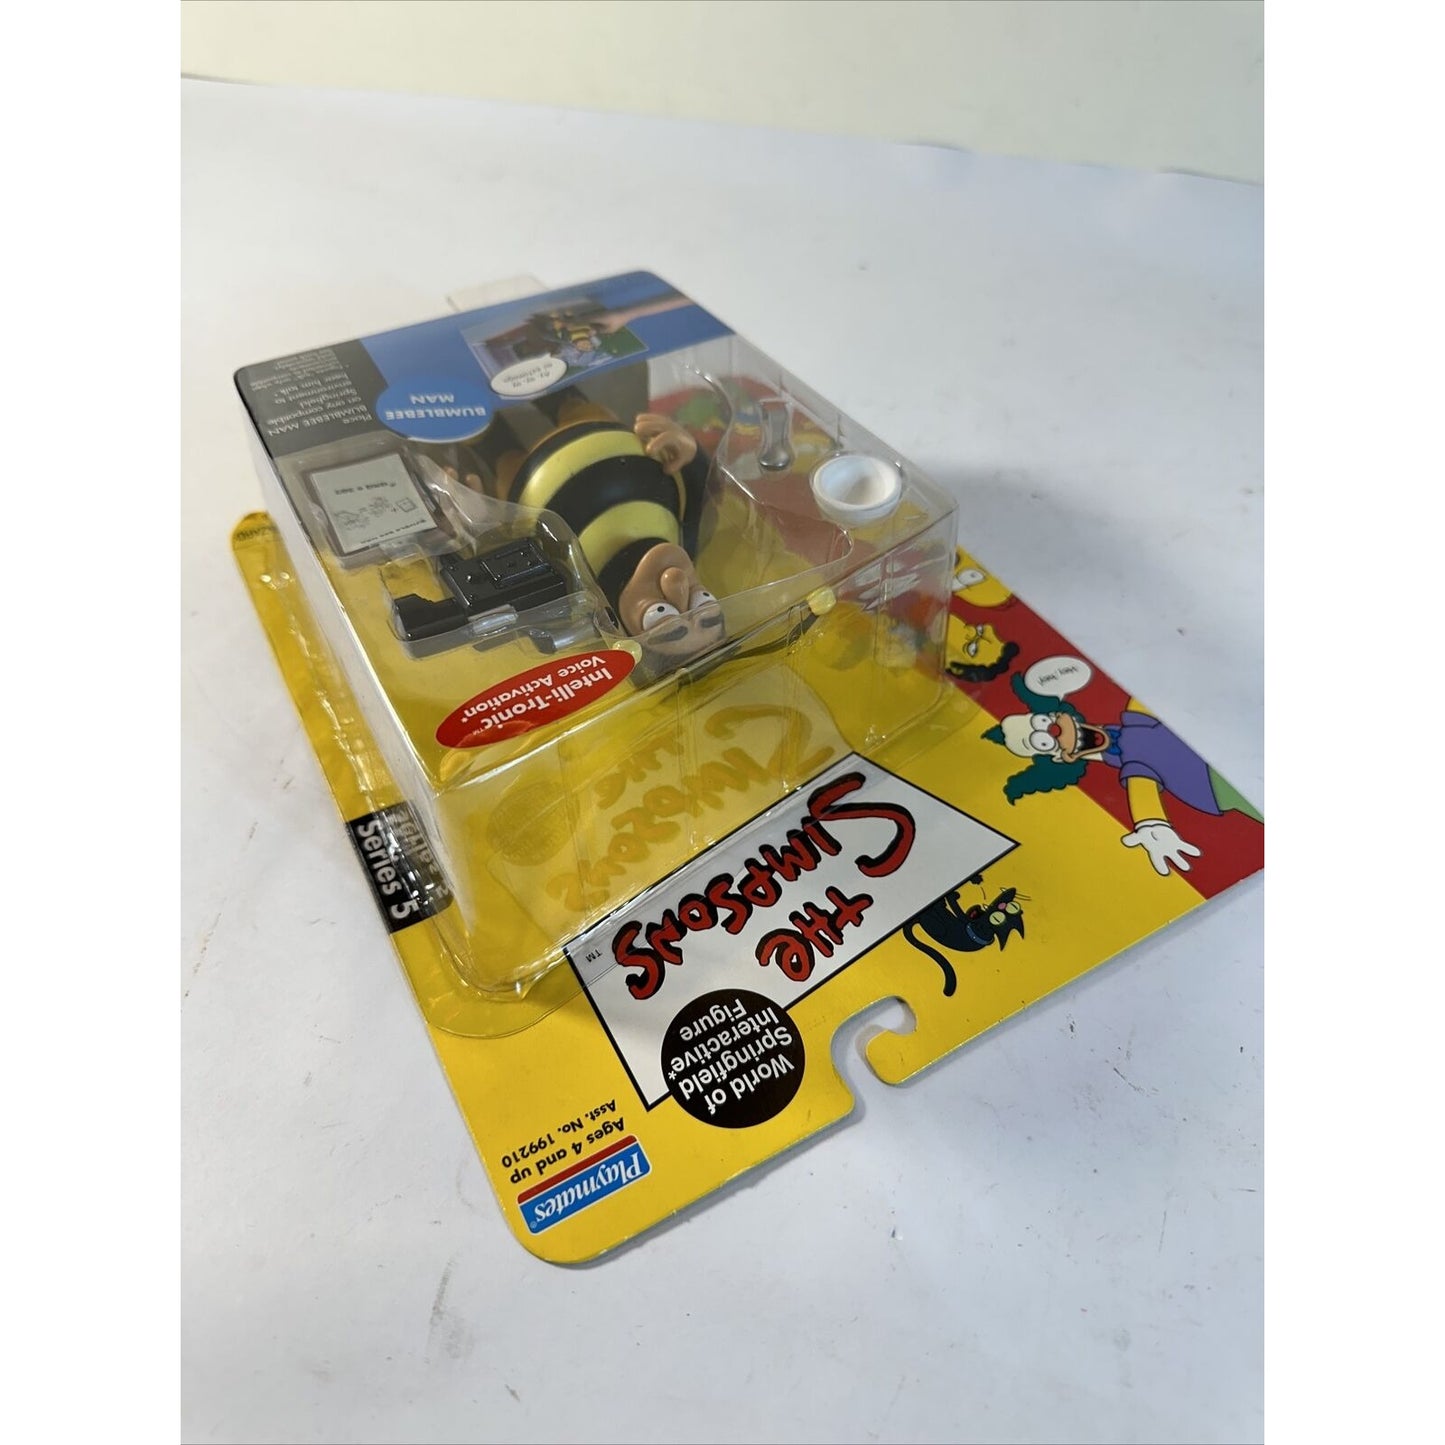 The Simpsons Bumblebee Man Series 5 World of Springfield Action Figure Playmates